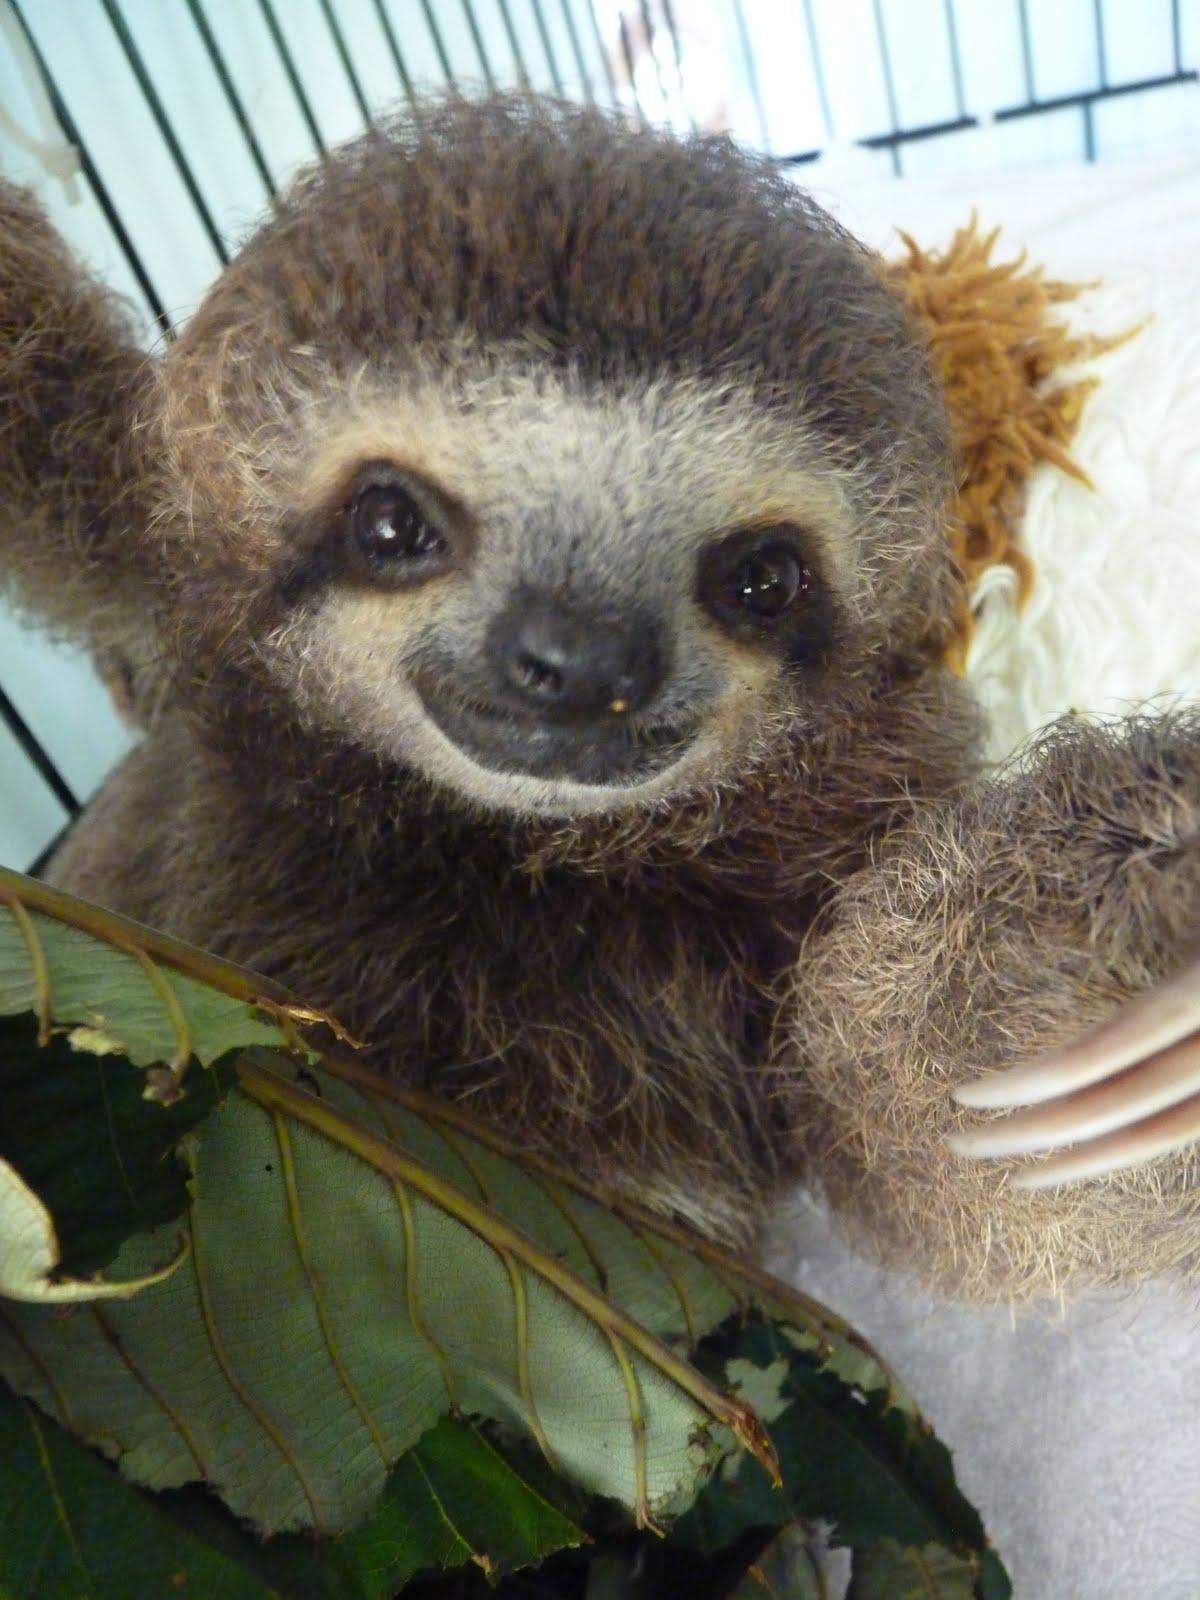 Free download Cute Sloth Wallpaper Cute Sloth Pics Funny [1200x1600] for your Desktop, Mobile & Tablet. Explore Funny Sloth Wallpaper. Free Wallpaper Sloth, HD Sloth Wallpaper, Baby Sloth Wallpaper